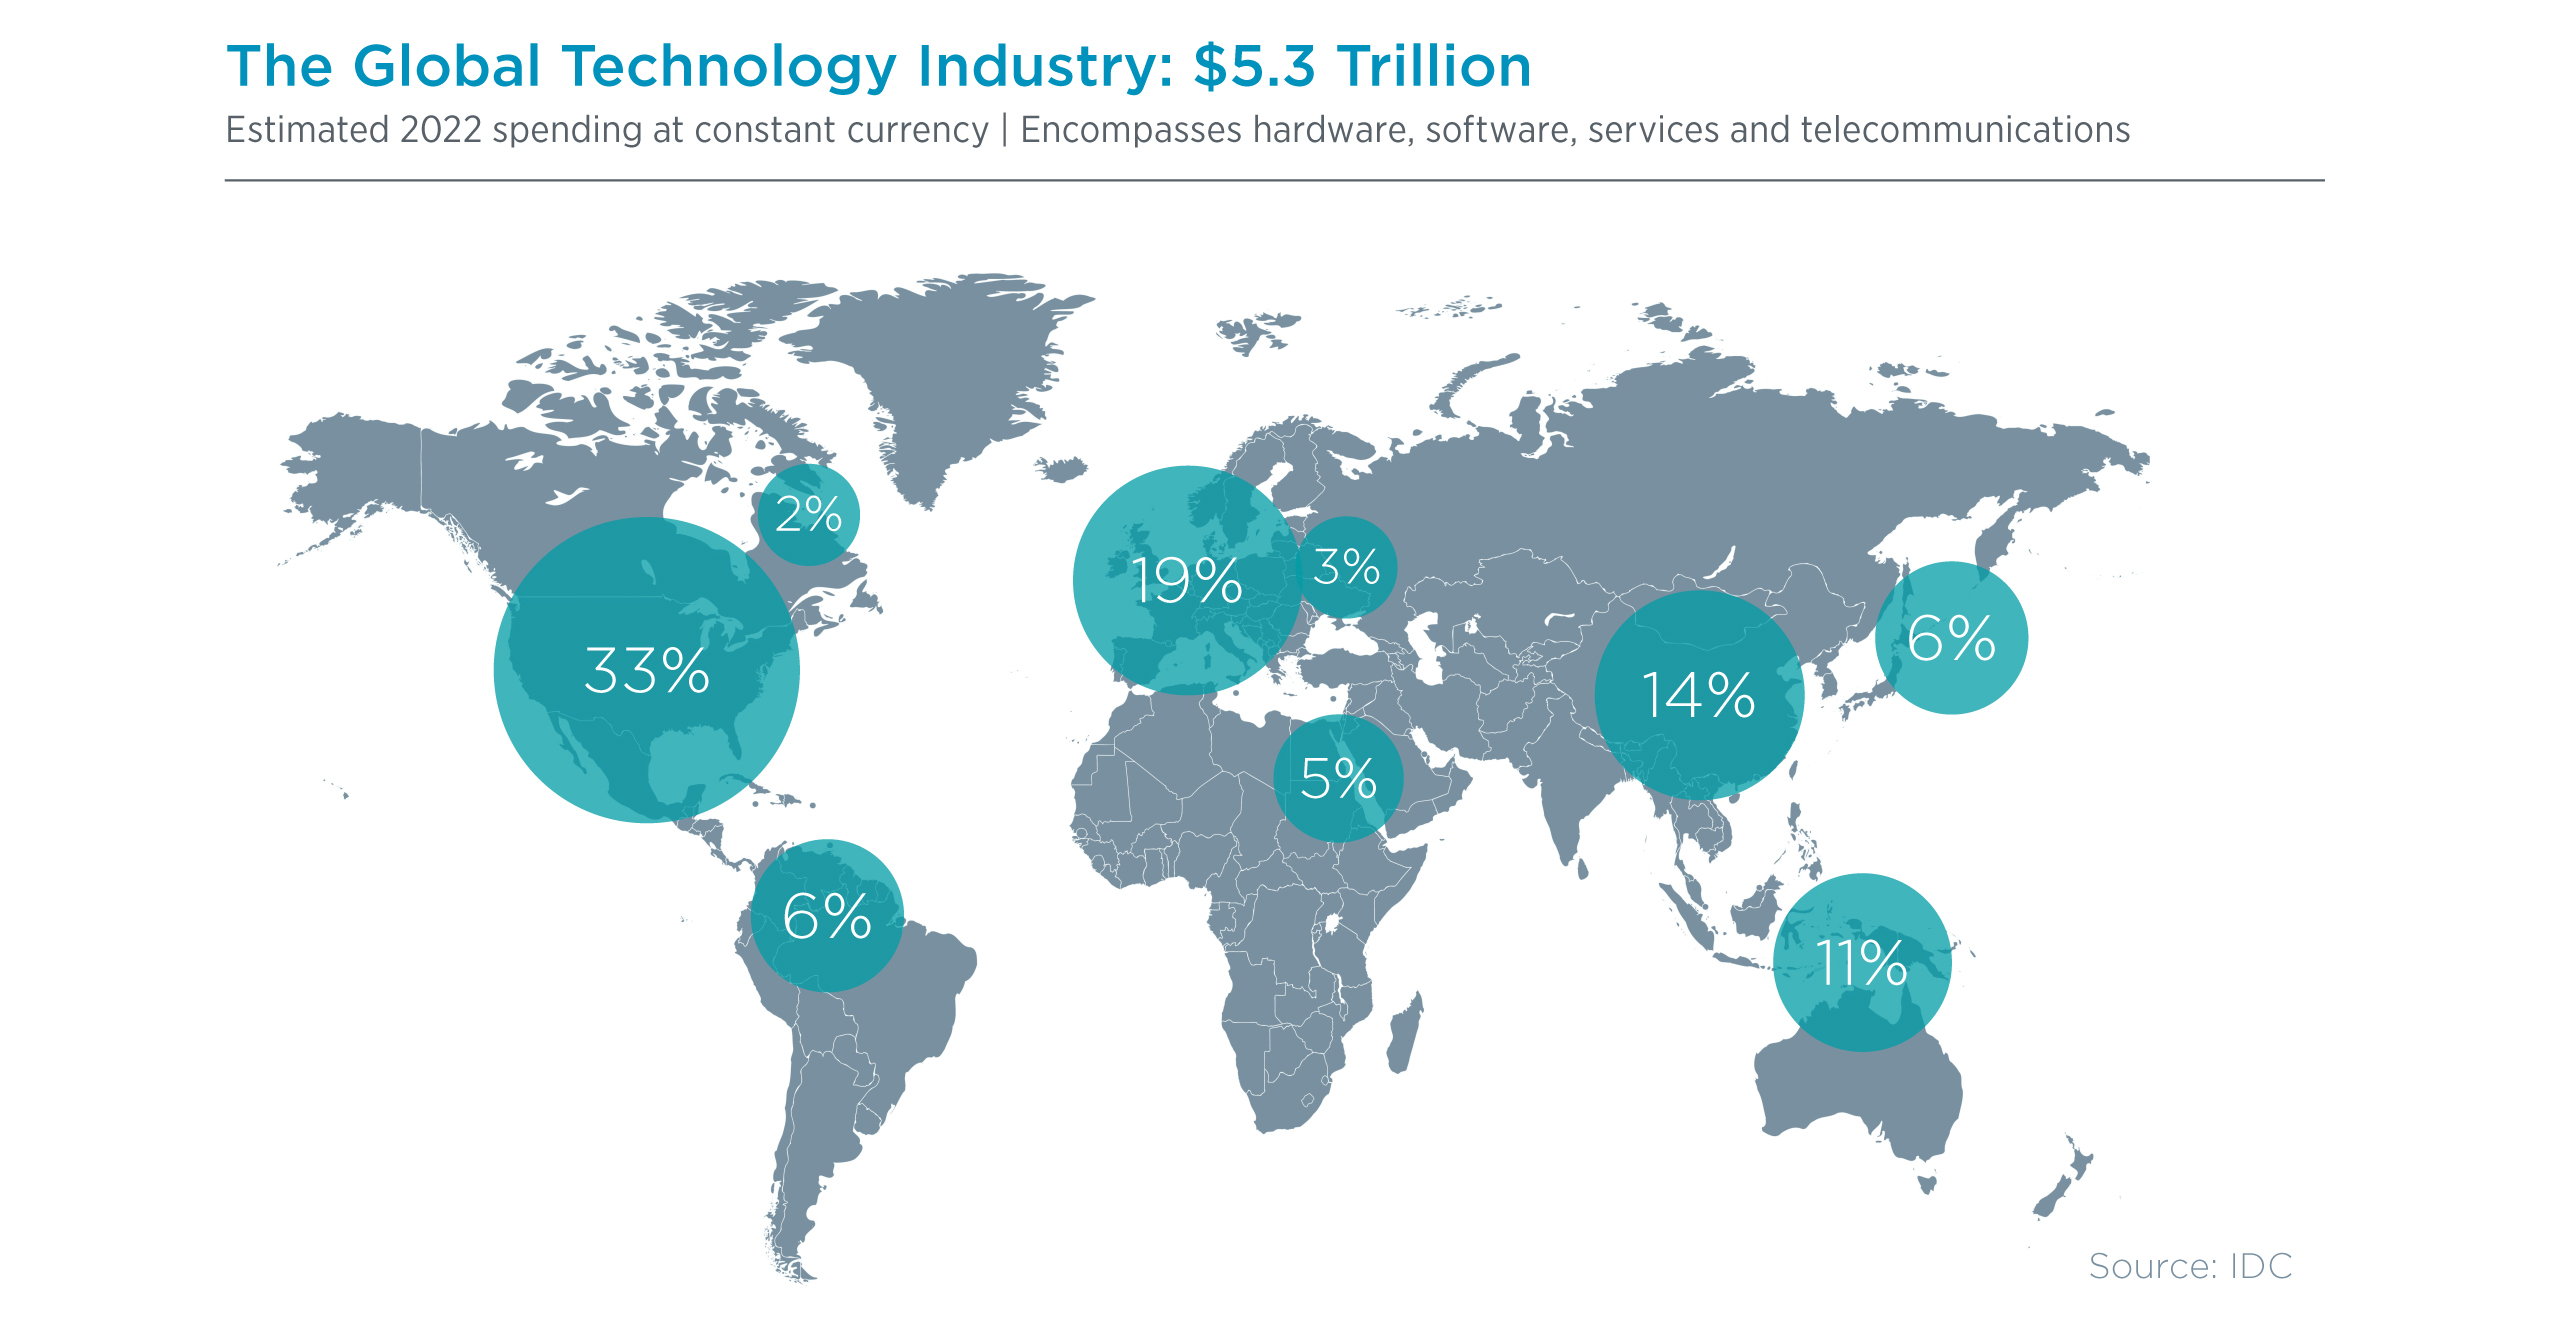 The Global Technology Industry- $5.3 Trillion